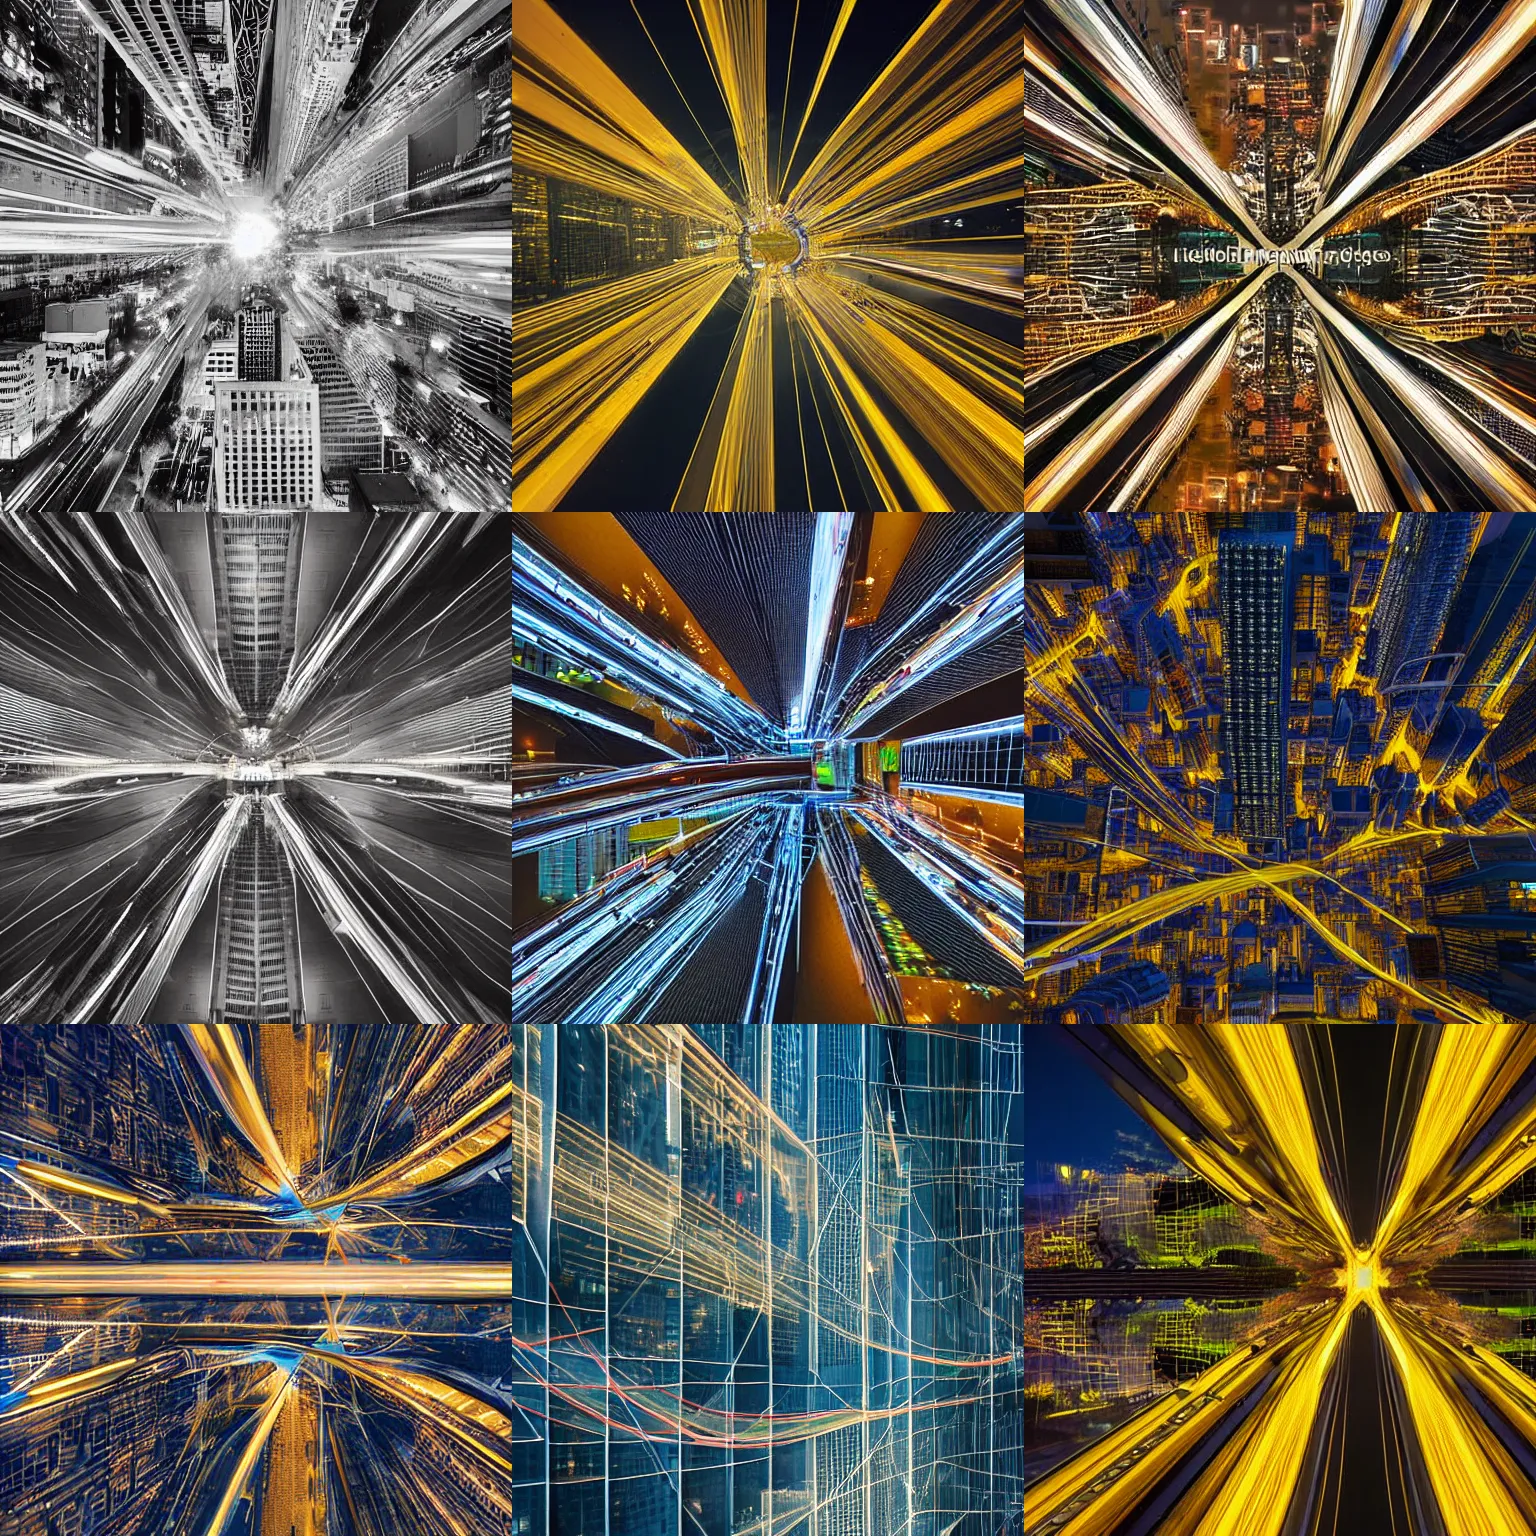 Prompt: Abstract images representing connected cities and buildings ,Traffic with light trails, from different perspectives interesting or unusual angles ,Perspective that looks up at buildings from below ,Evening or night cityscapes of buildings and roads from aerial or elevated view ,Evening or night cityscapes captured from human eye level ,Abstract facades of buildings ,Urban city view with unique angles